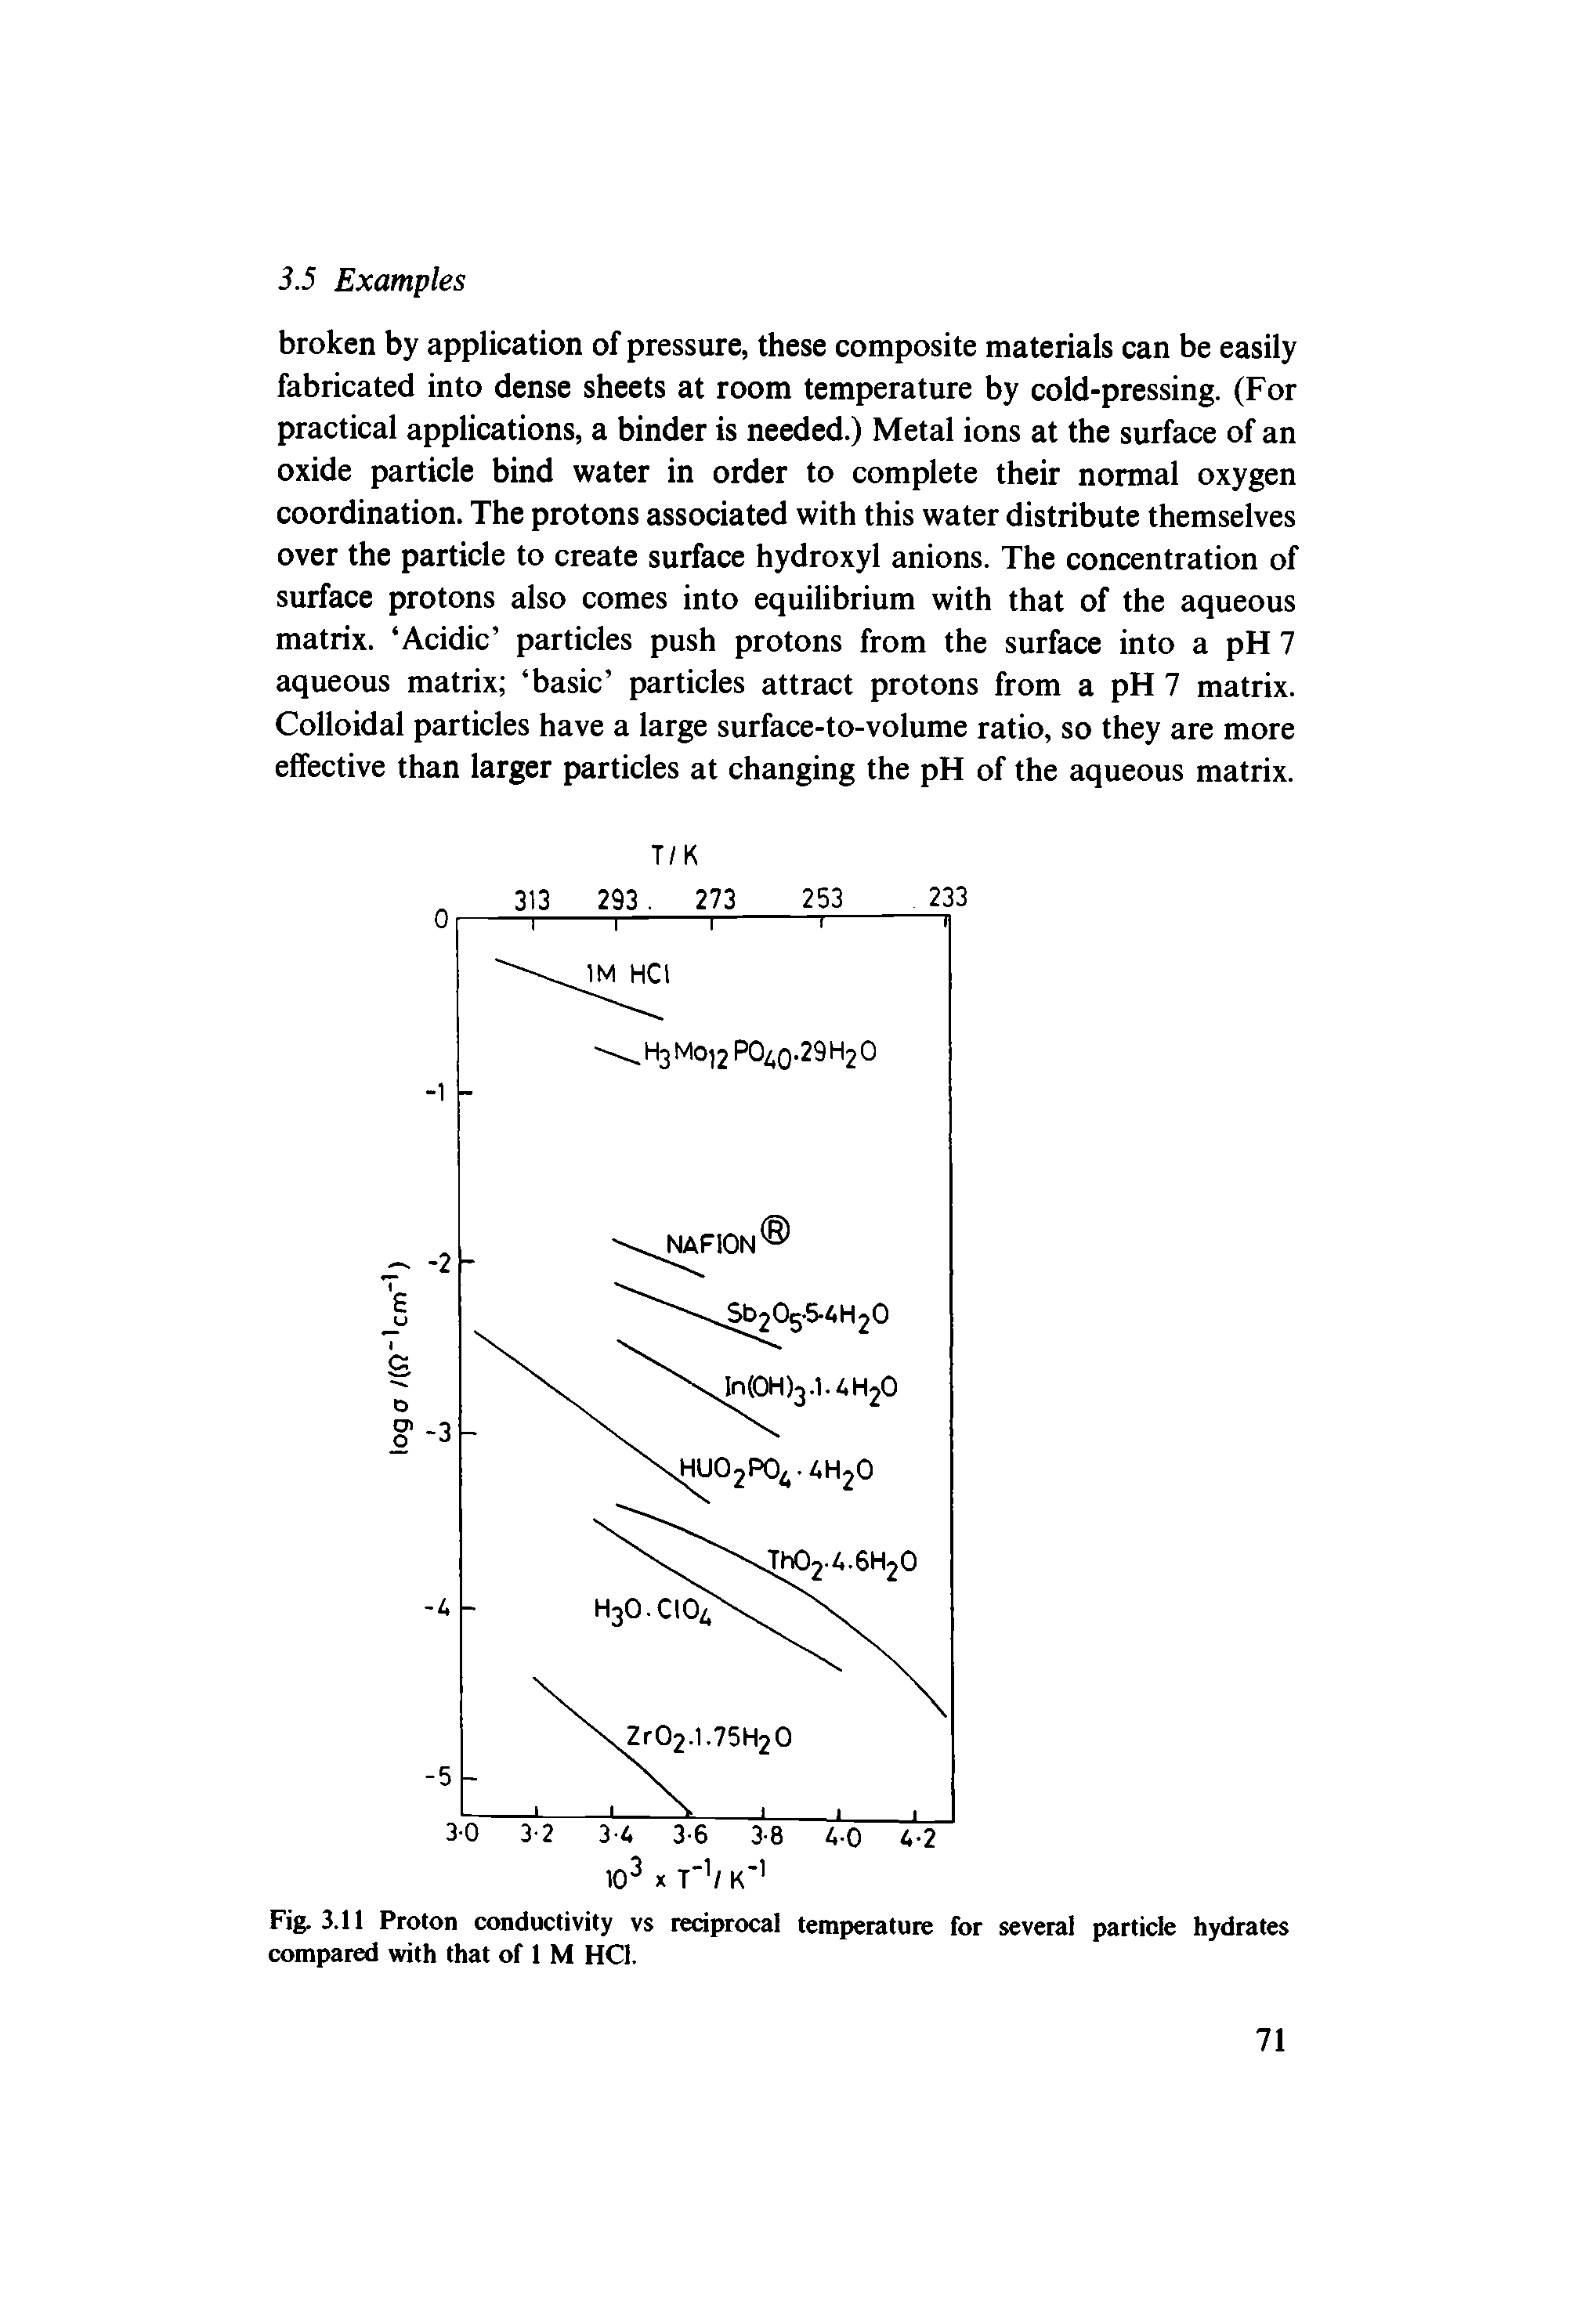 Fig. 3.11 Proton conductivity vs reciprocal temperature for several particle hydrates compared with that of 1 M HCl.